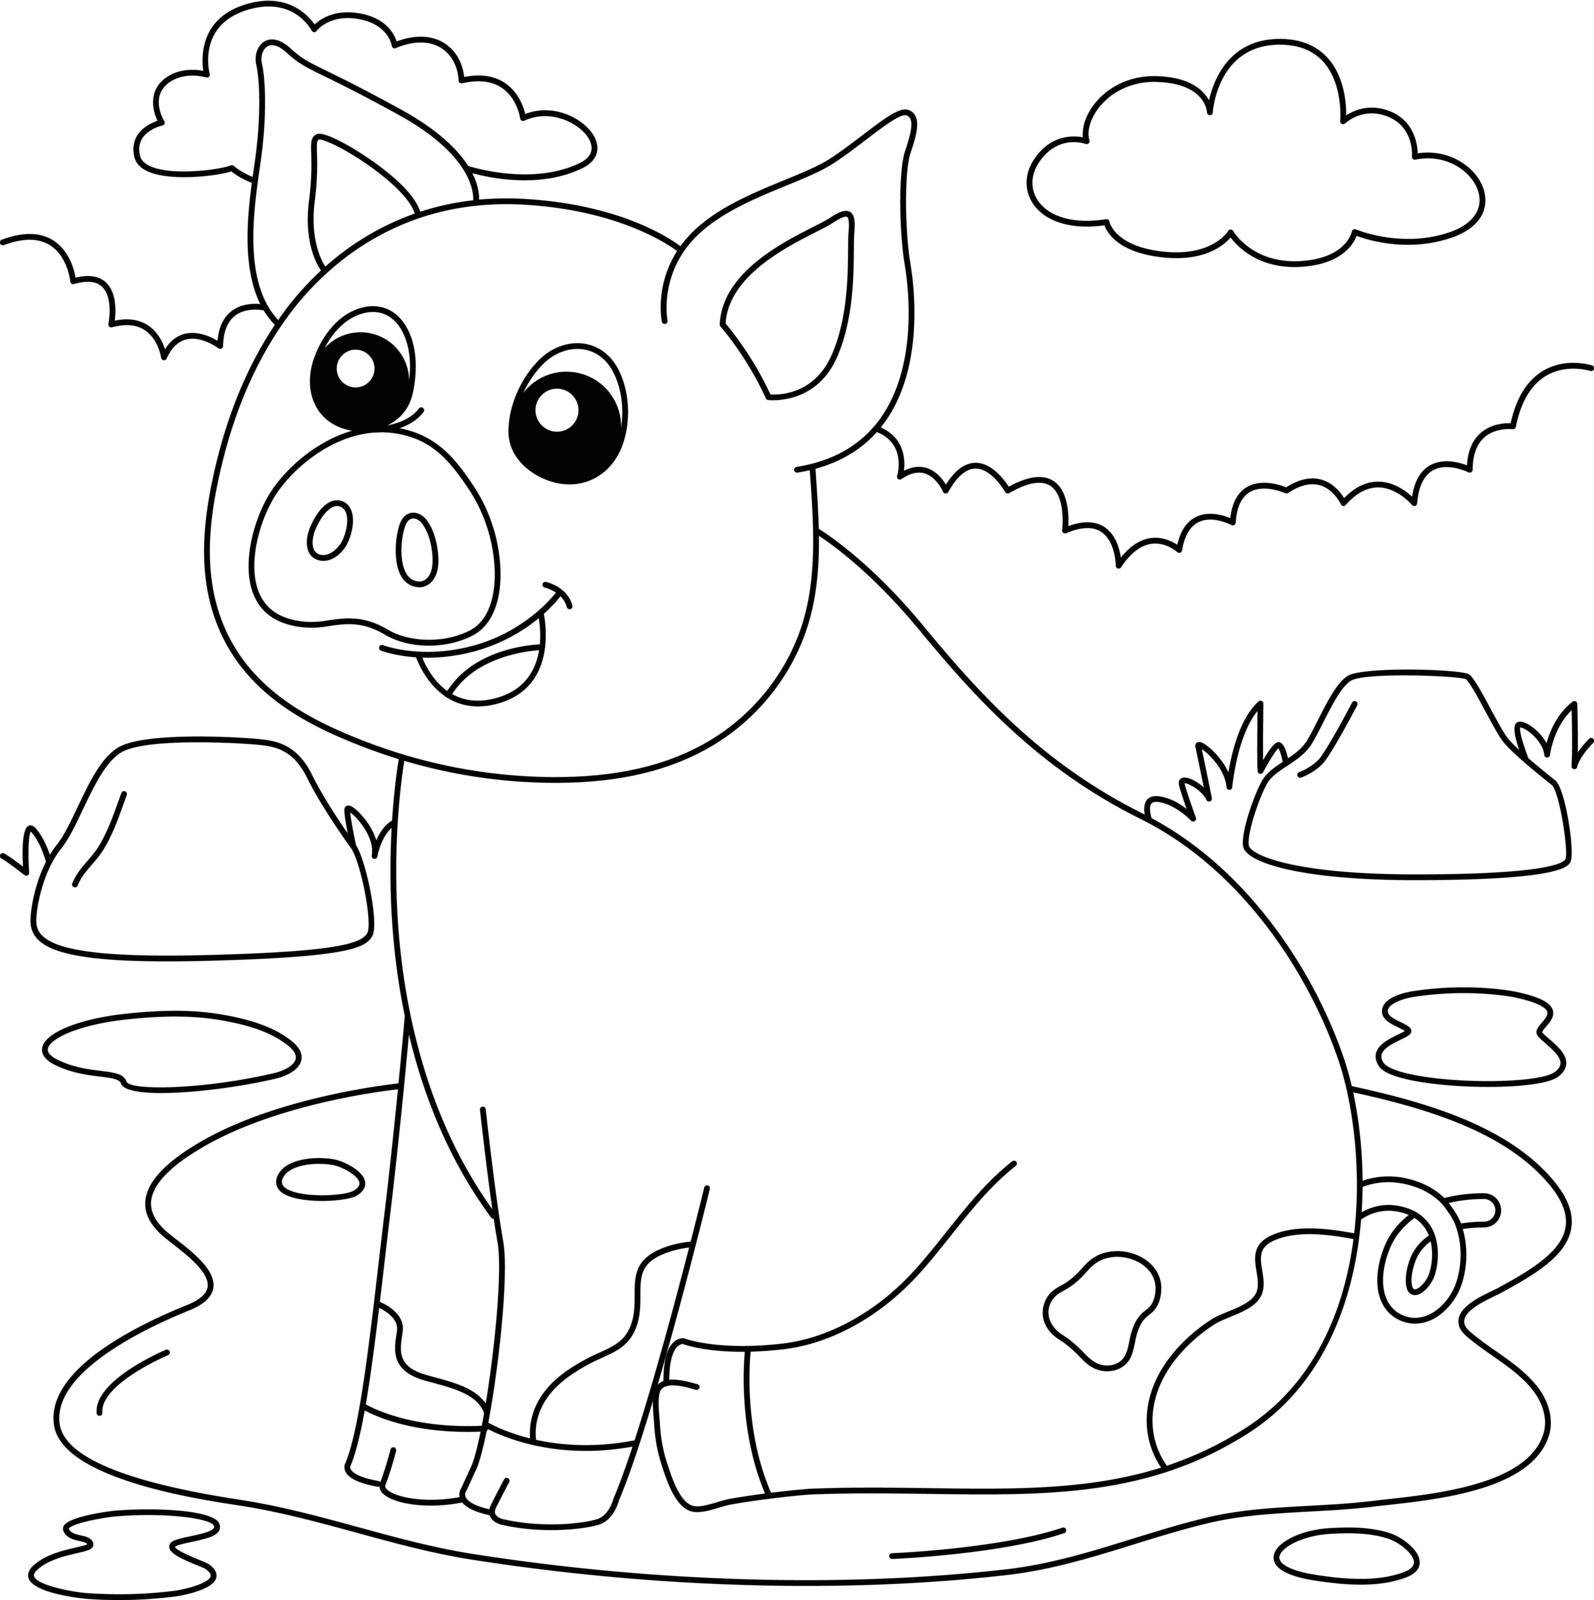 A cute and funny coloring page of a pig farm animal. Provides hours of coloring fun for children. To color, this page is very easy. Suitable for little kids and toddlers.